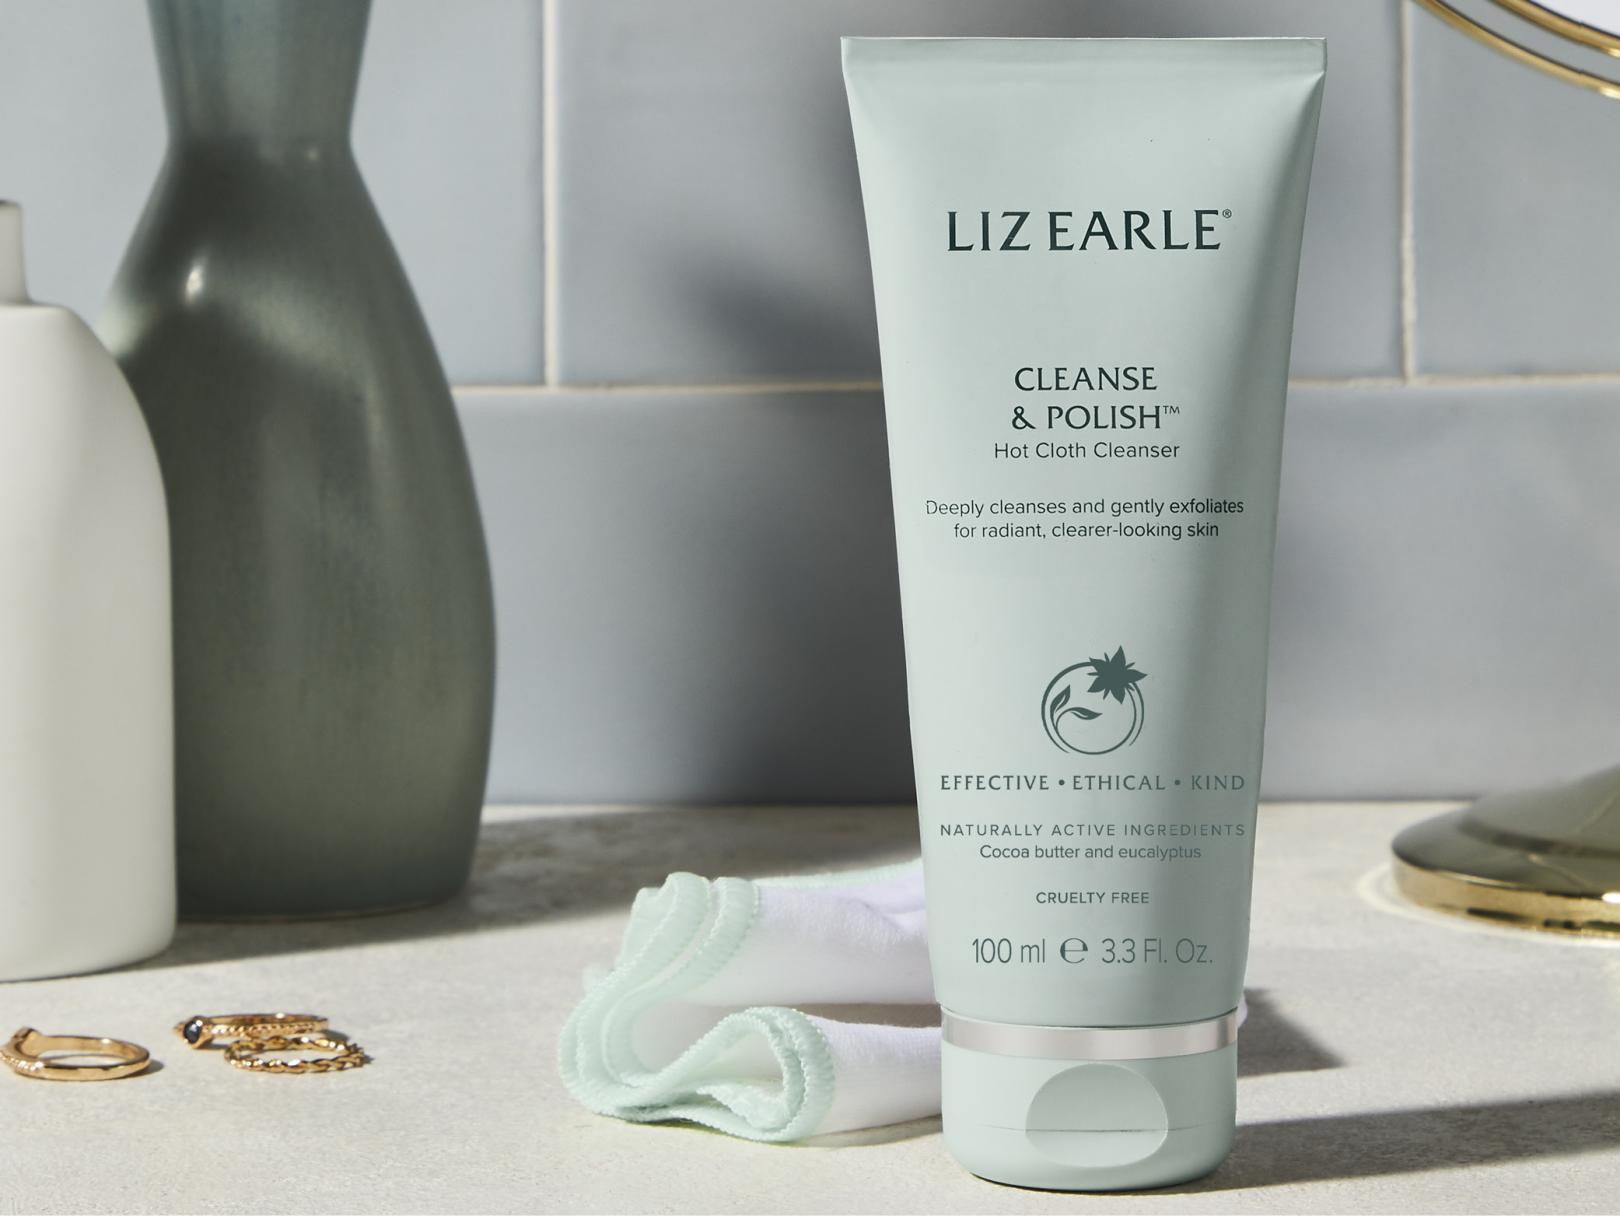 A bottle of a Liz Earle produuct